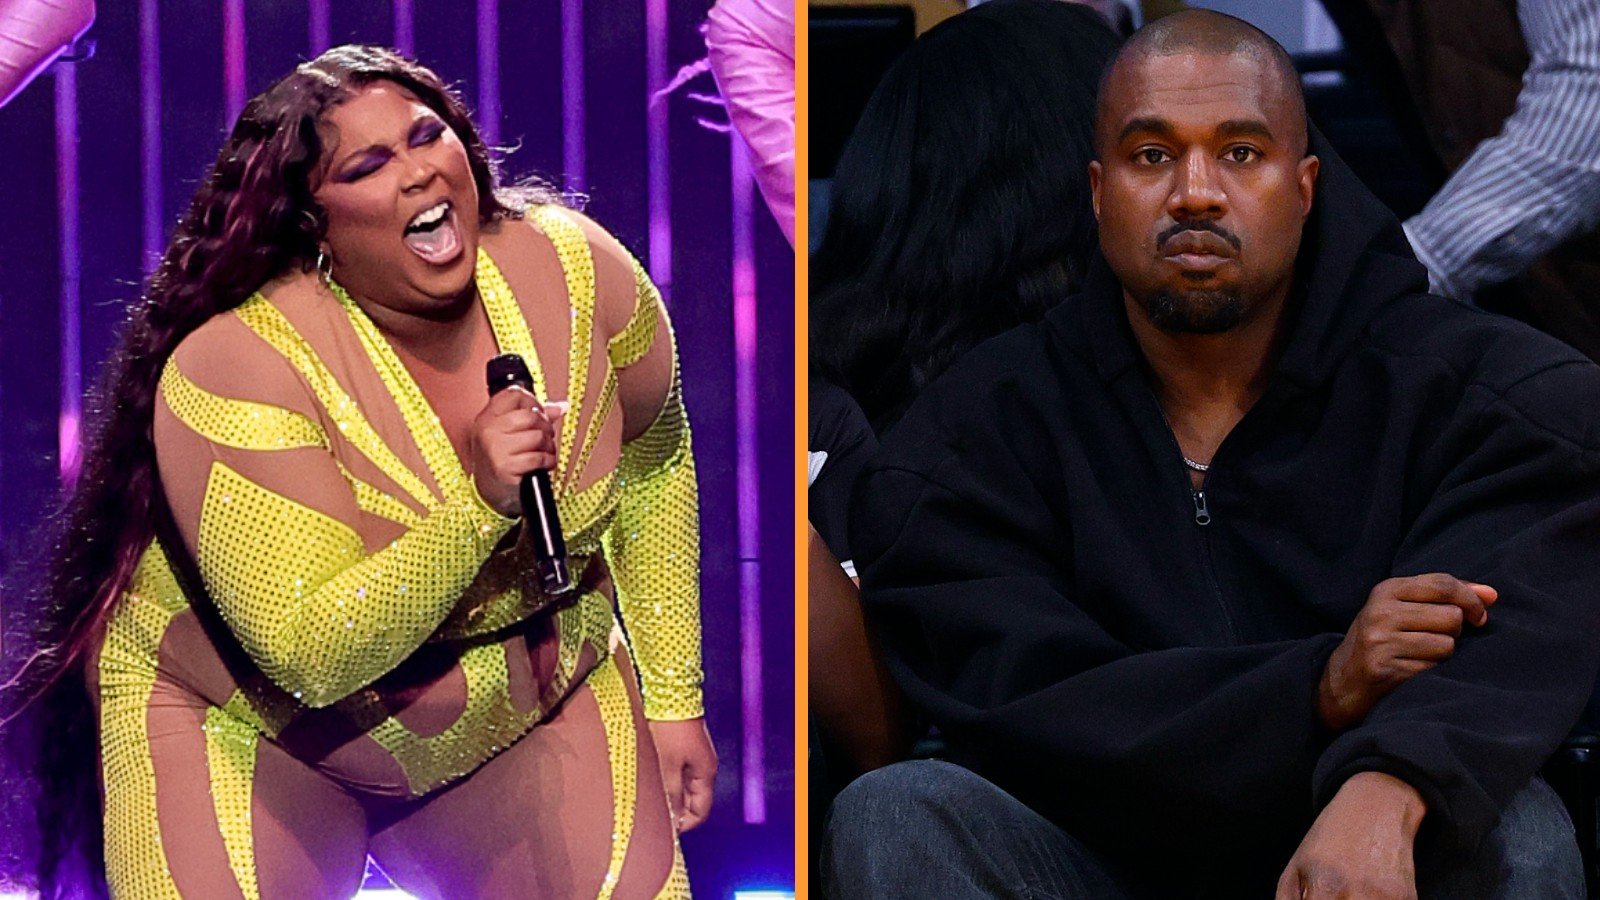 Lizzo seemingly claps back at Kanye West's comments about her weight